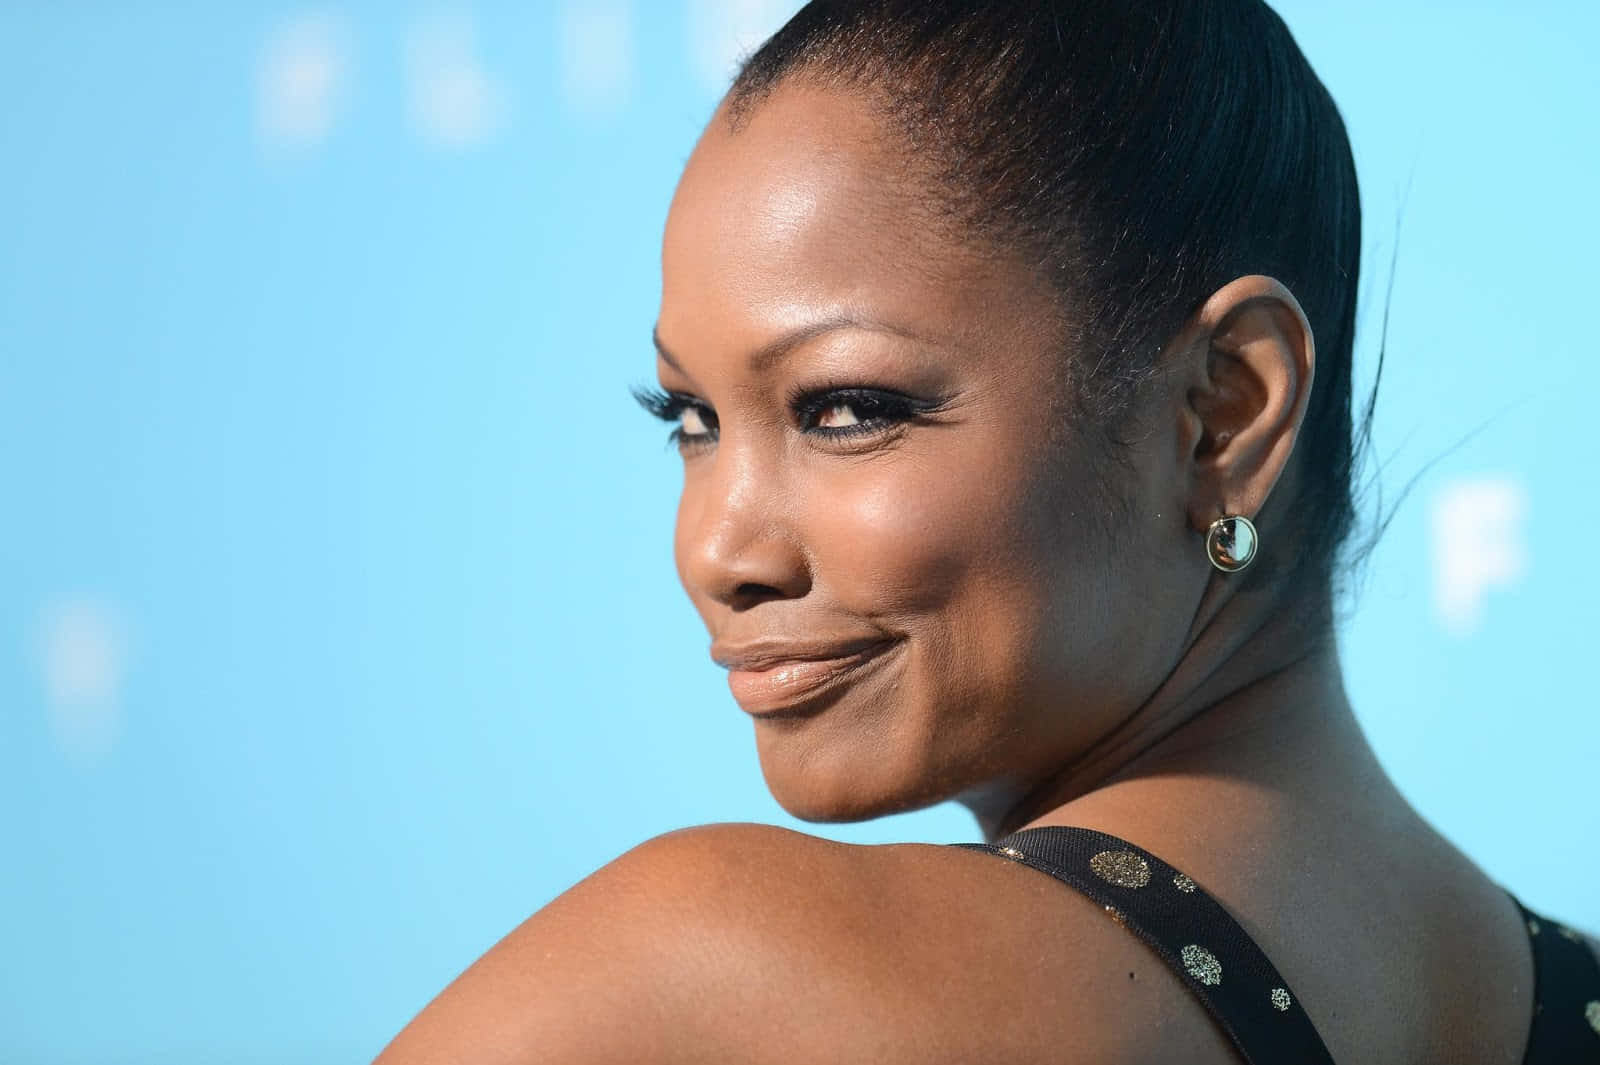 Garcelle Beauvais Smiling Elegantly in a Photoshoot Wallpaper